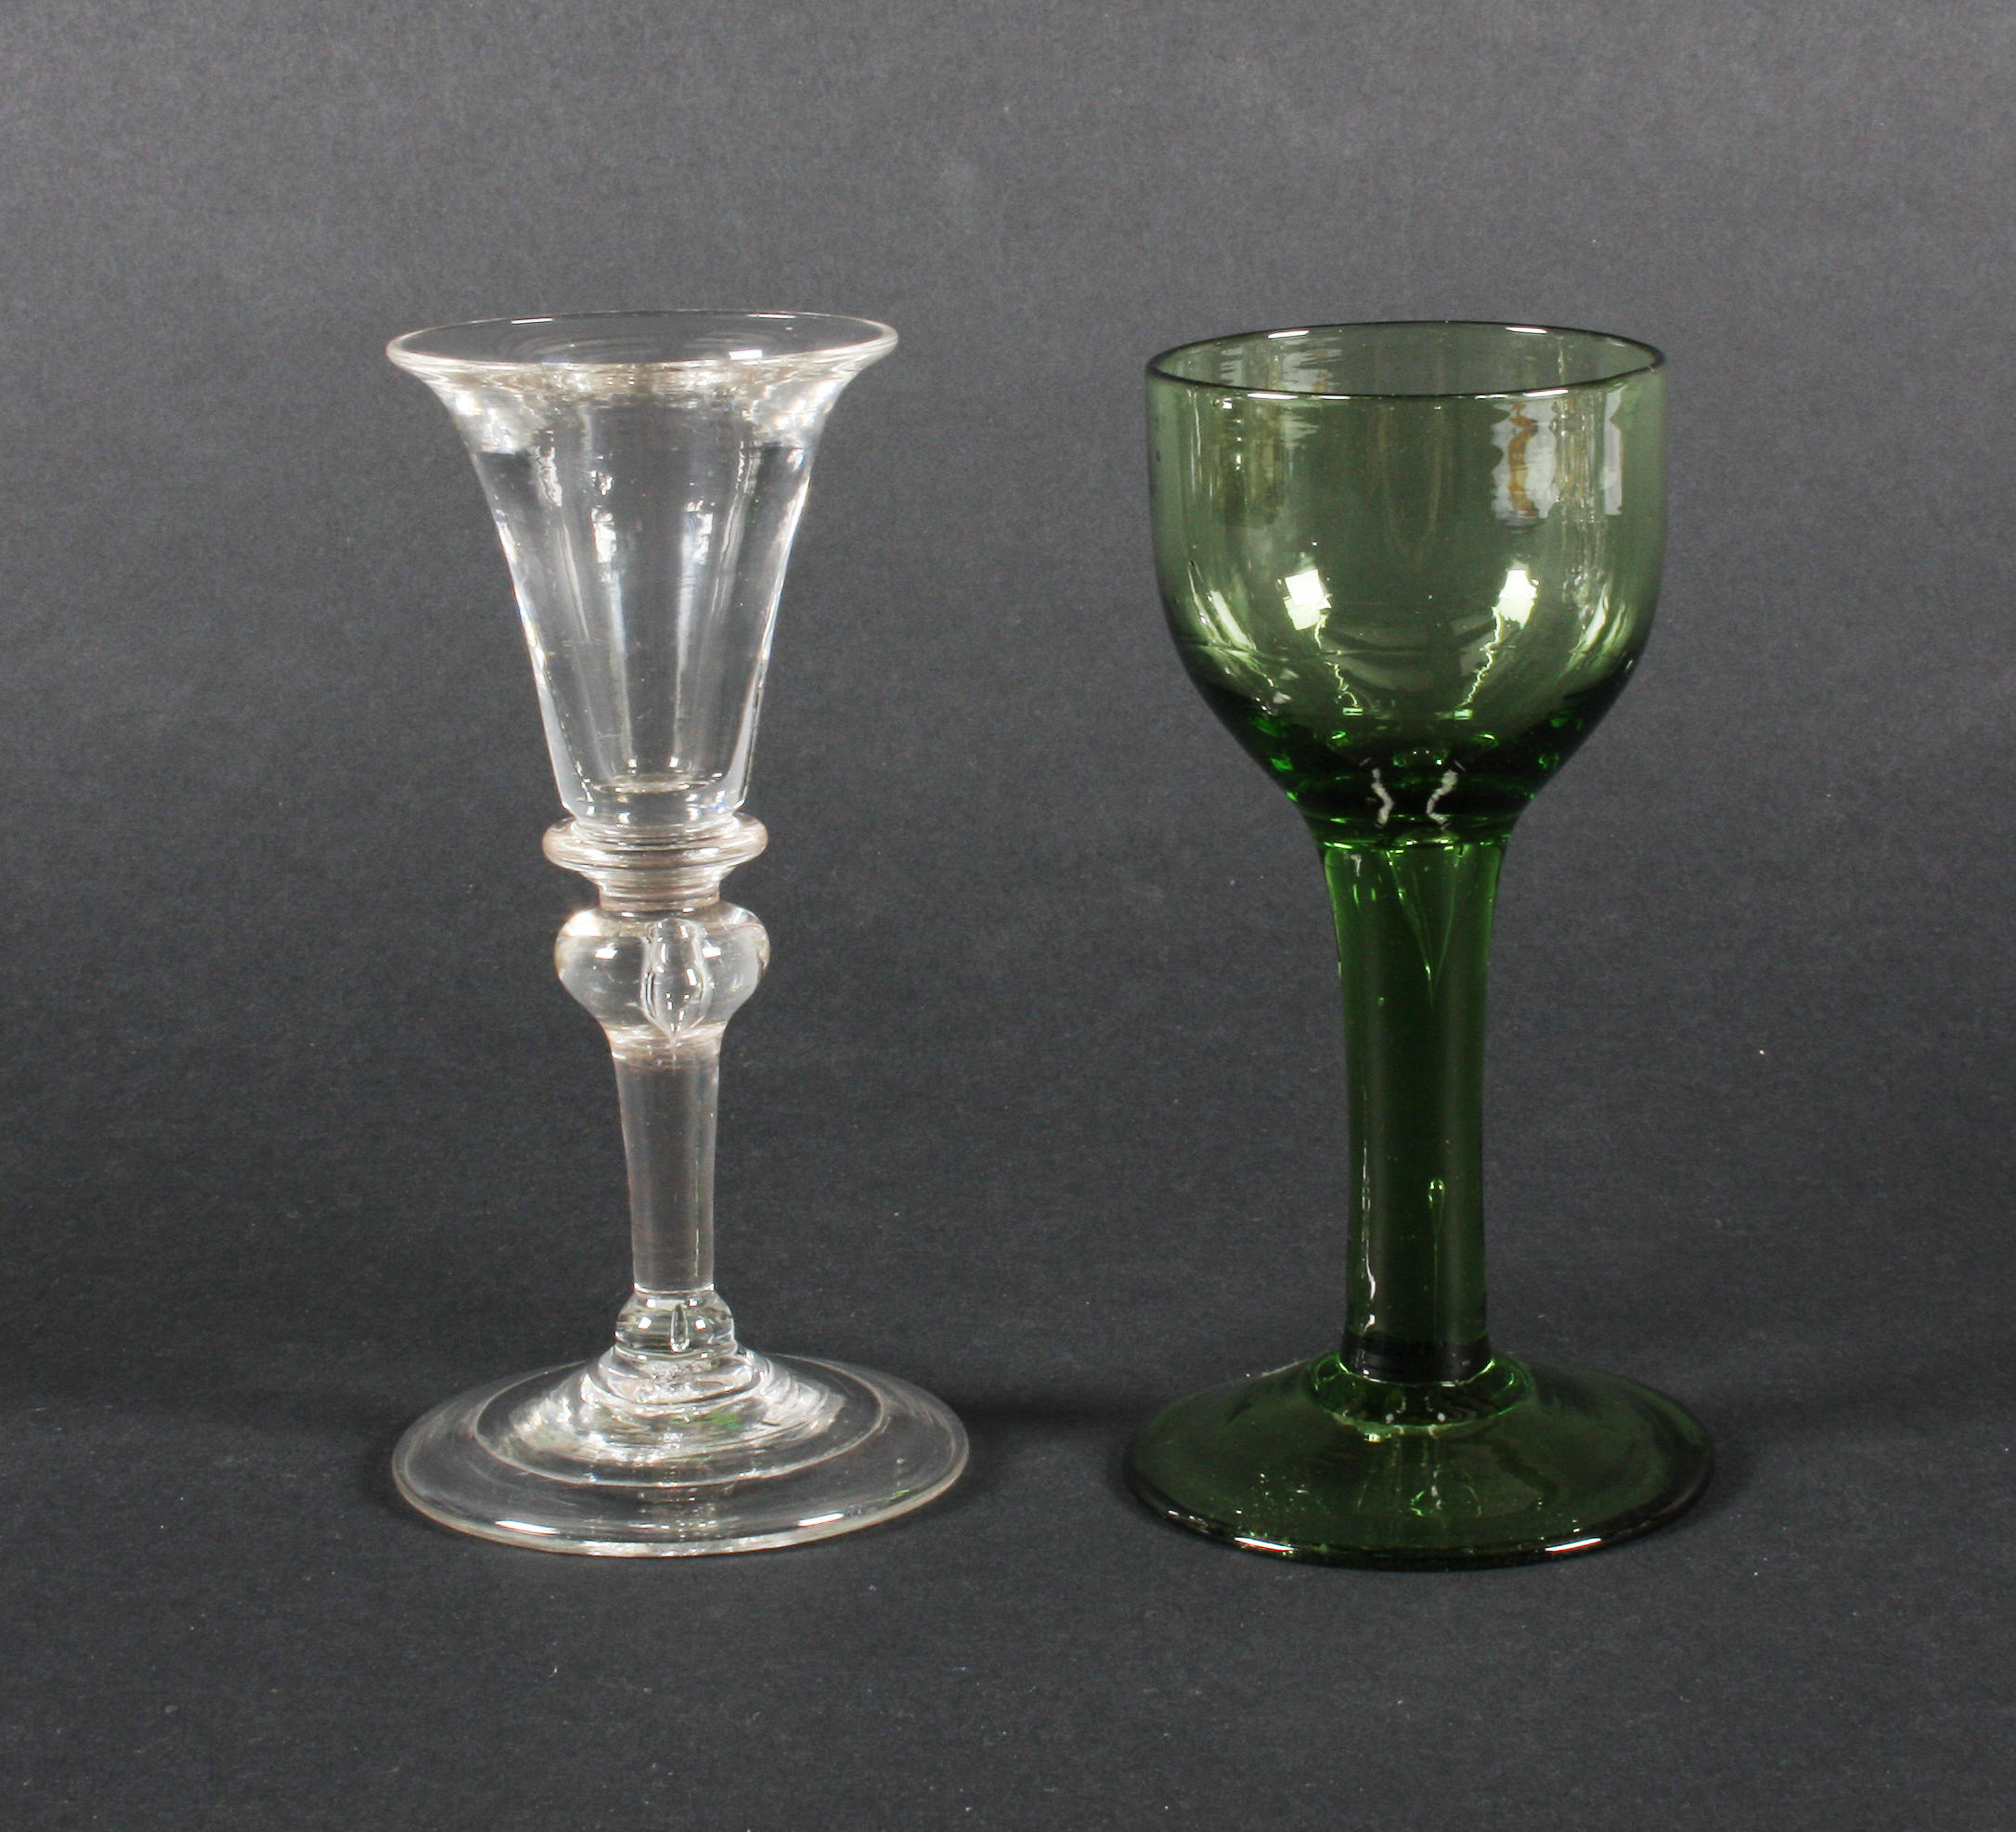 A plain stem gin glass and a green-tinted plain stem wine glass